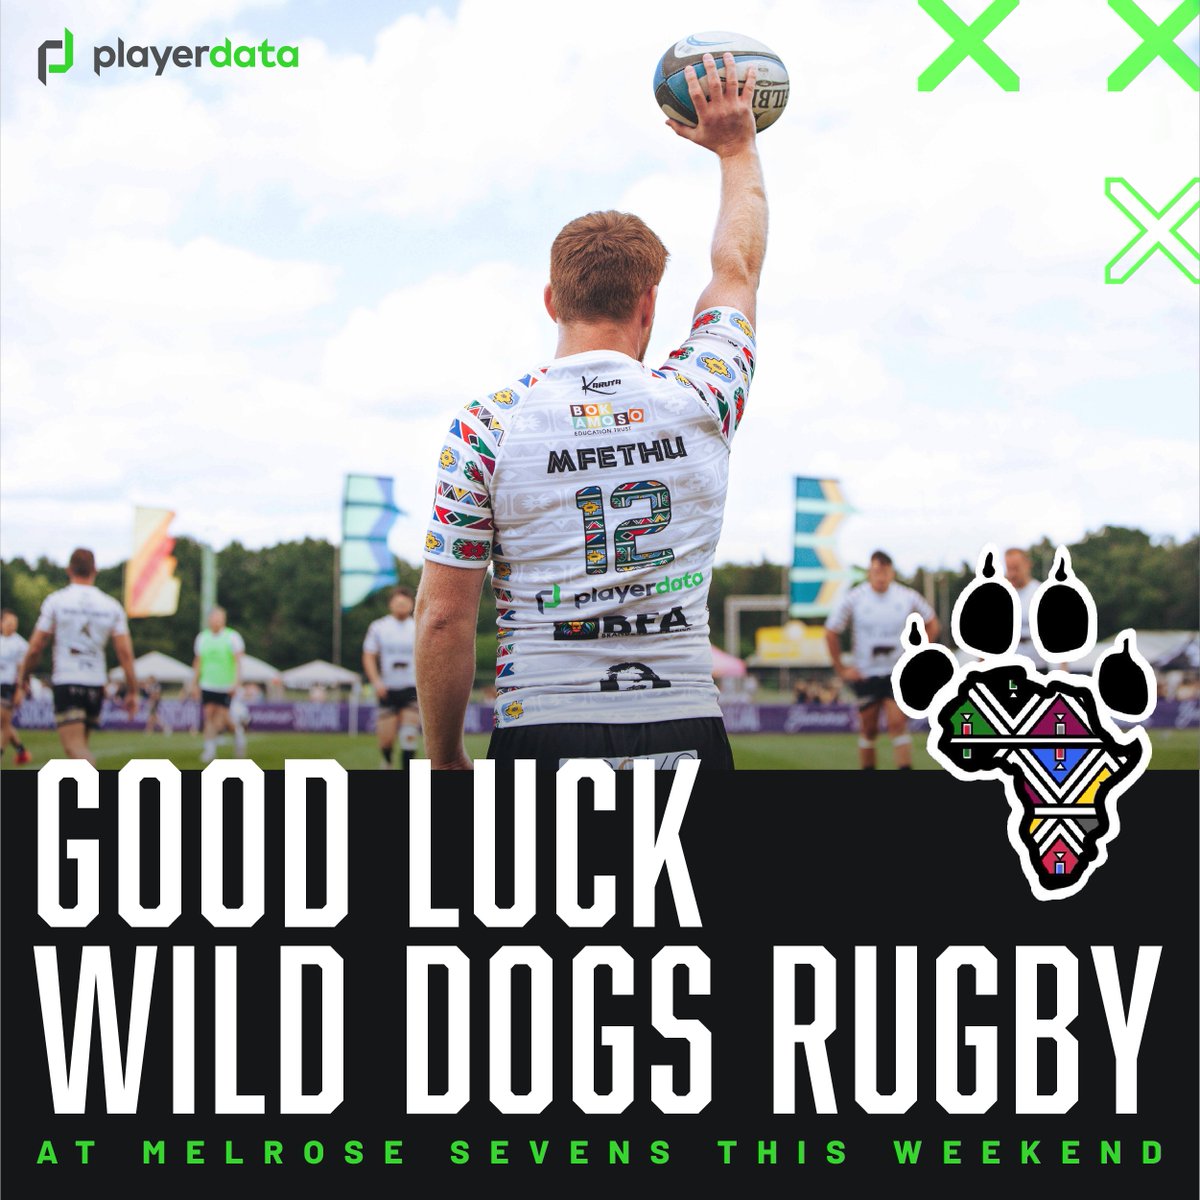 Good luck to our partners at @wilddogsrugby who are competing this weekend at @Melrose7s, the oldest rugby 7s competition in the world (dating back to 1883) and arguably the most prestigious 7s tournament in the UK 🏉💪

#melrose7s #homeofsevens #rugby #PlayerDataCommunity